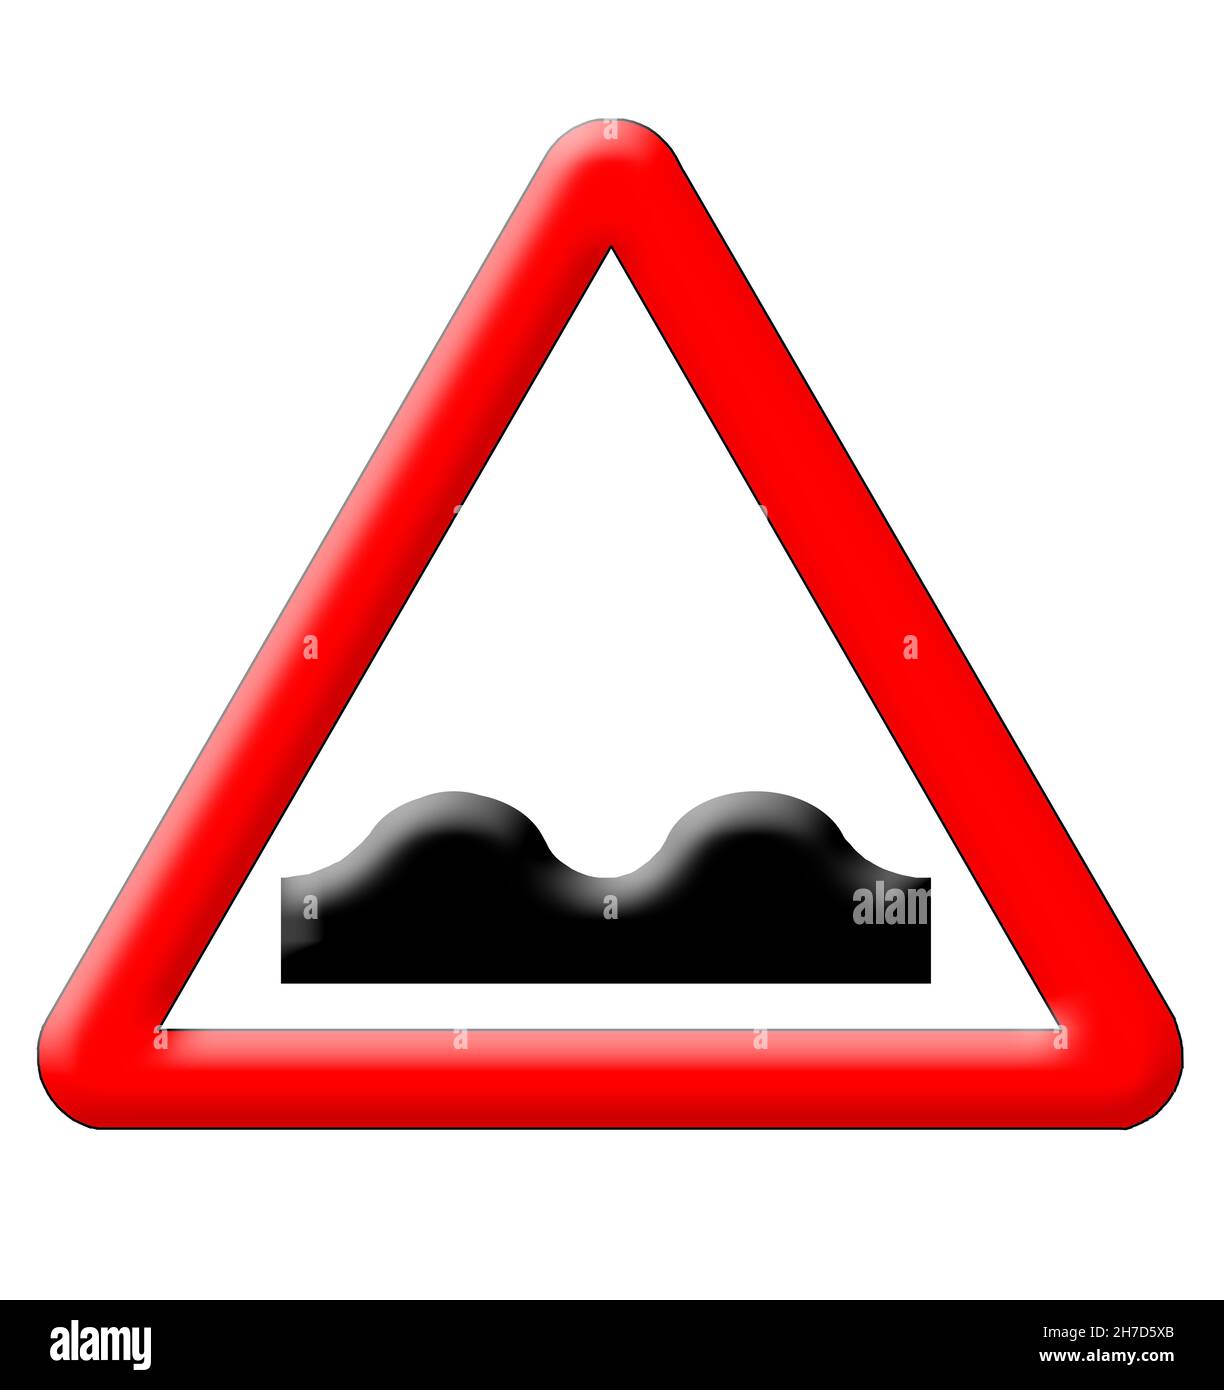 Bumps traffic sign isolated over white background Stock Photo